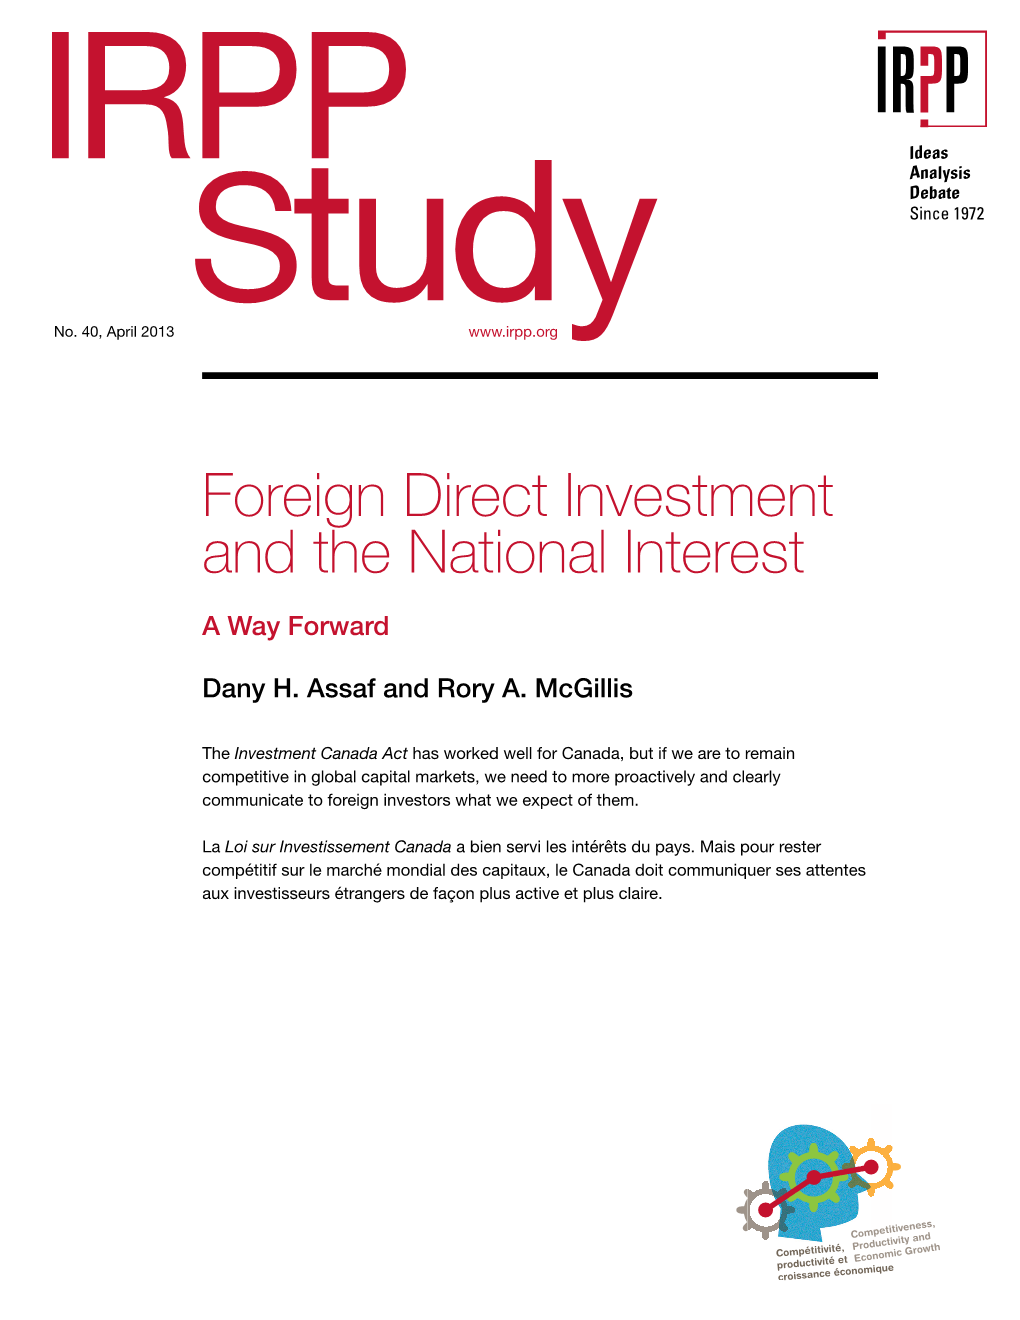 Foreign Direct Investment and the National Interest